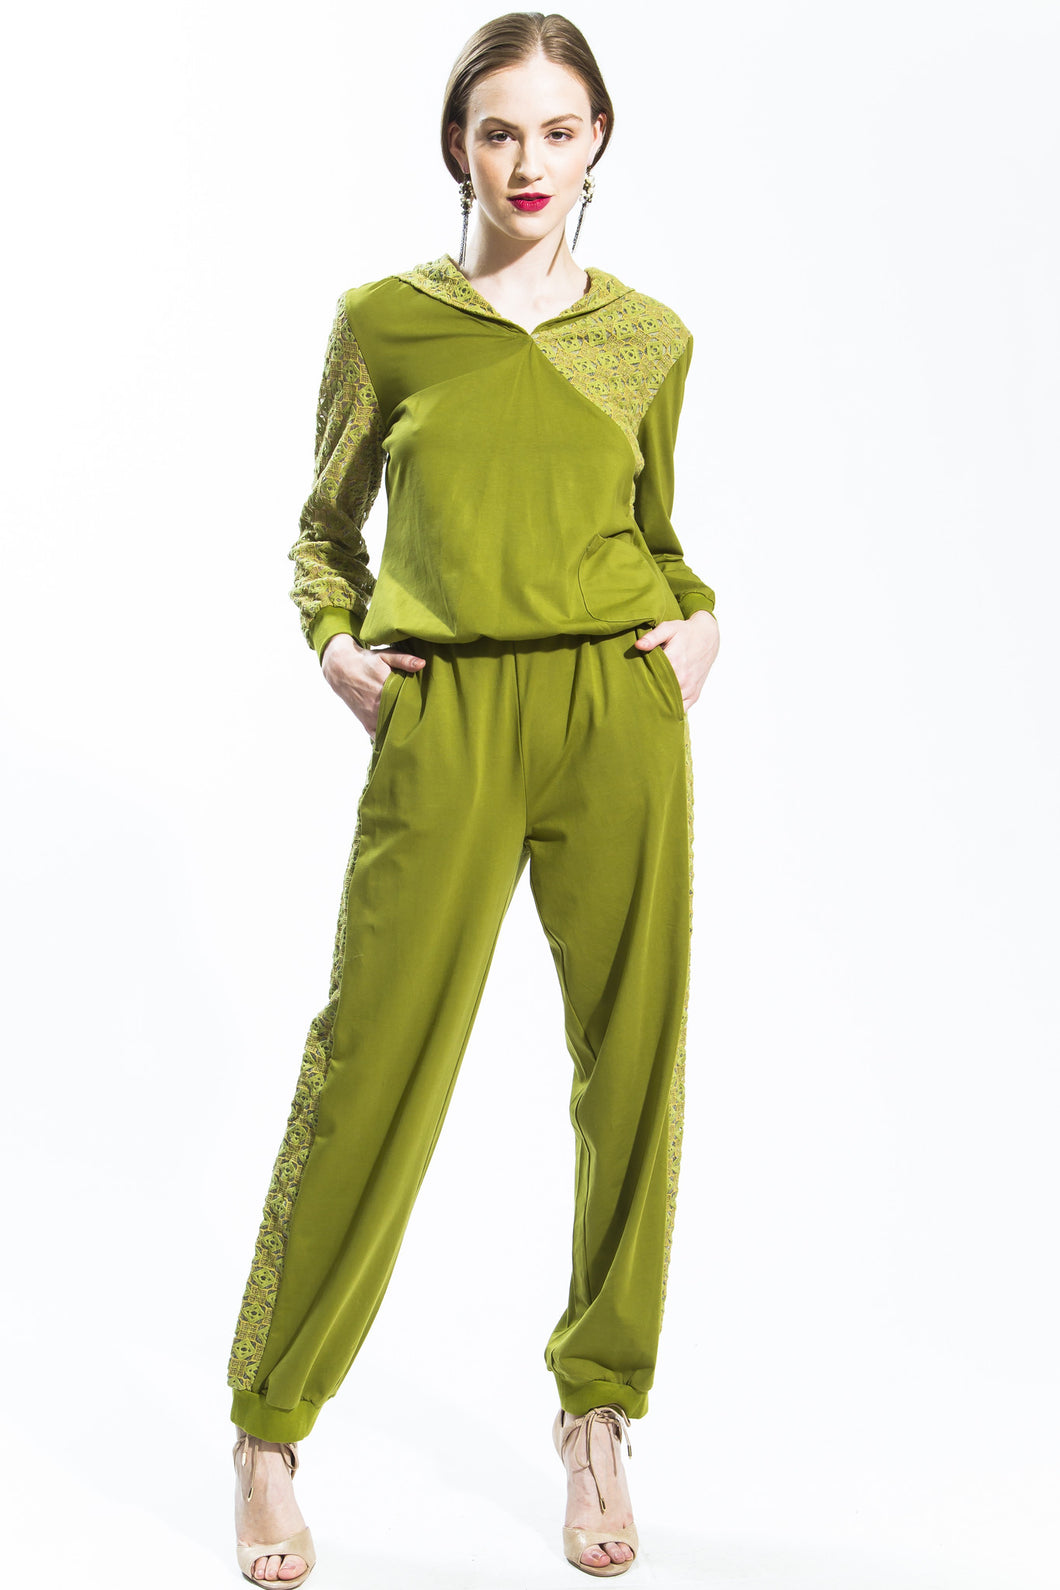 Hooded Lace Tracksuit (Green/Gold) Style # 1239P